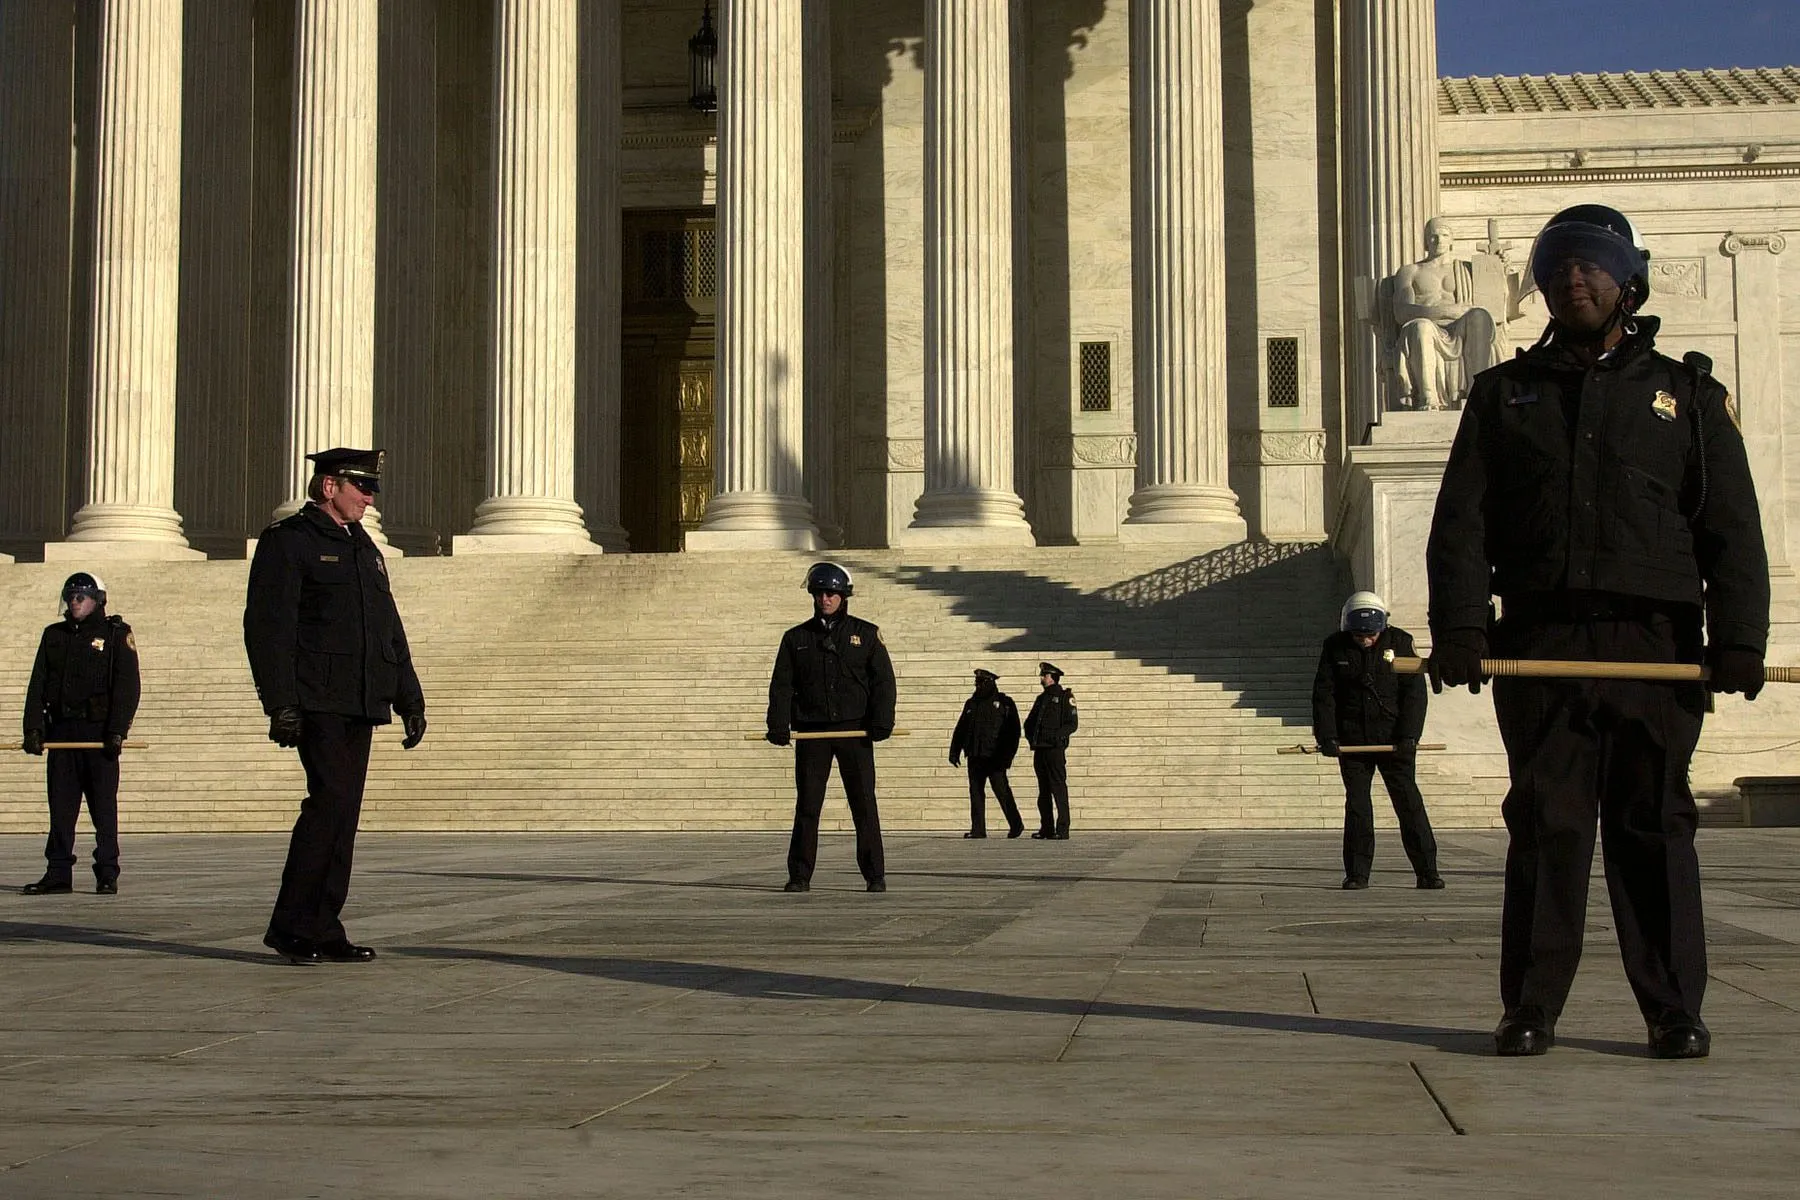 Police in front of the Supreme Court